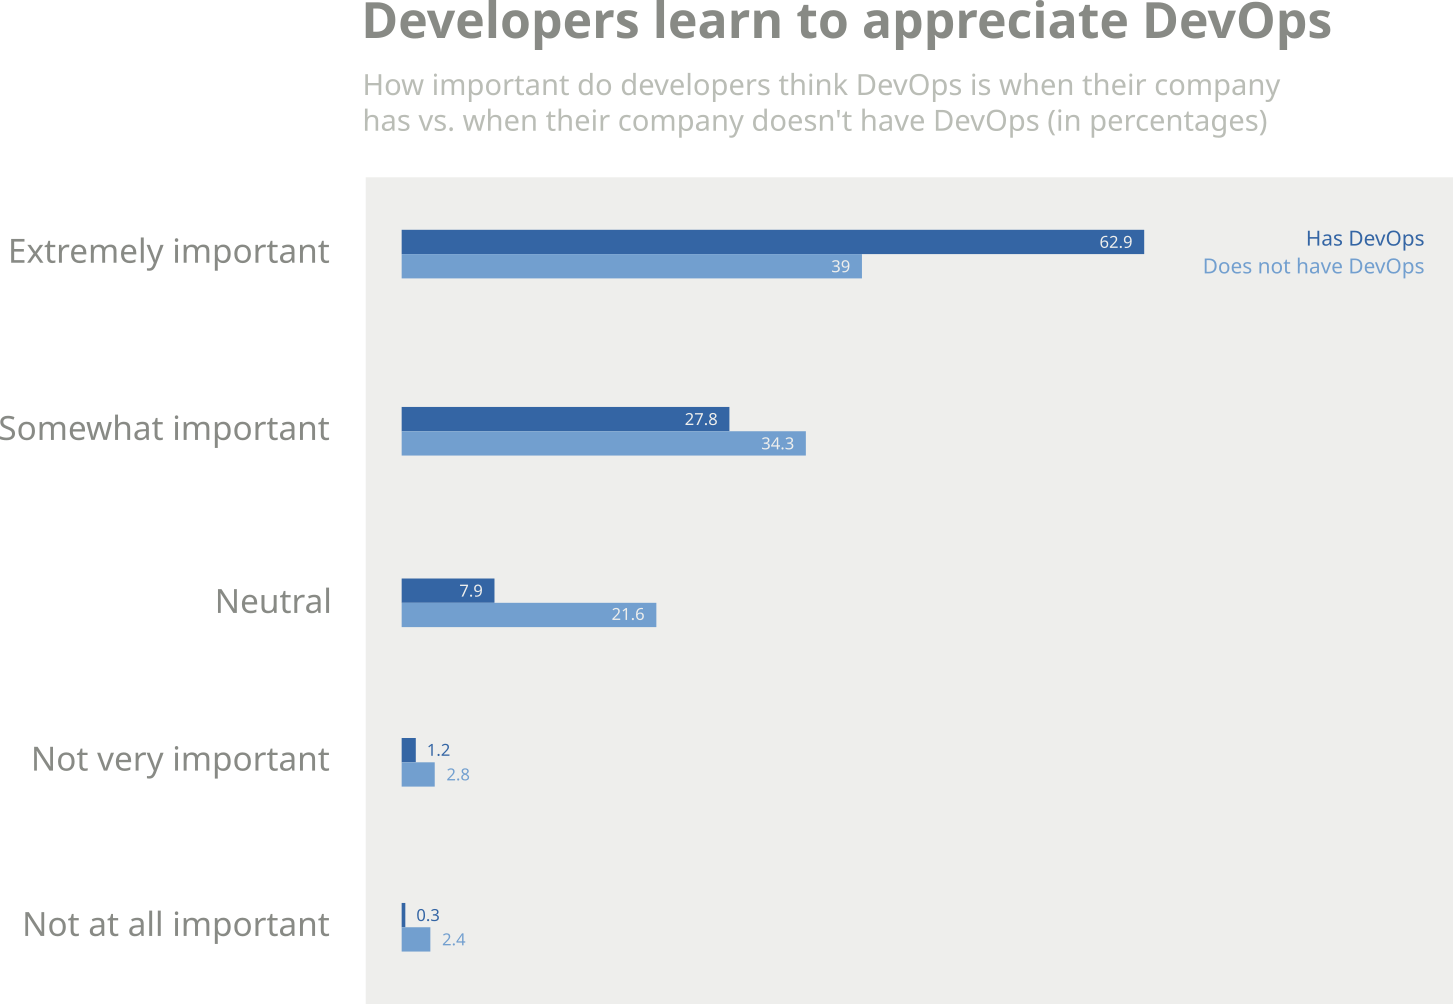 How much developers value DevOps when they have it vs. when they don't have it